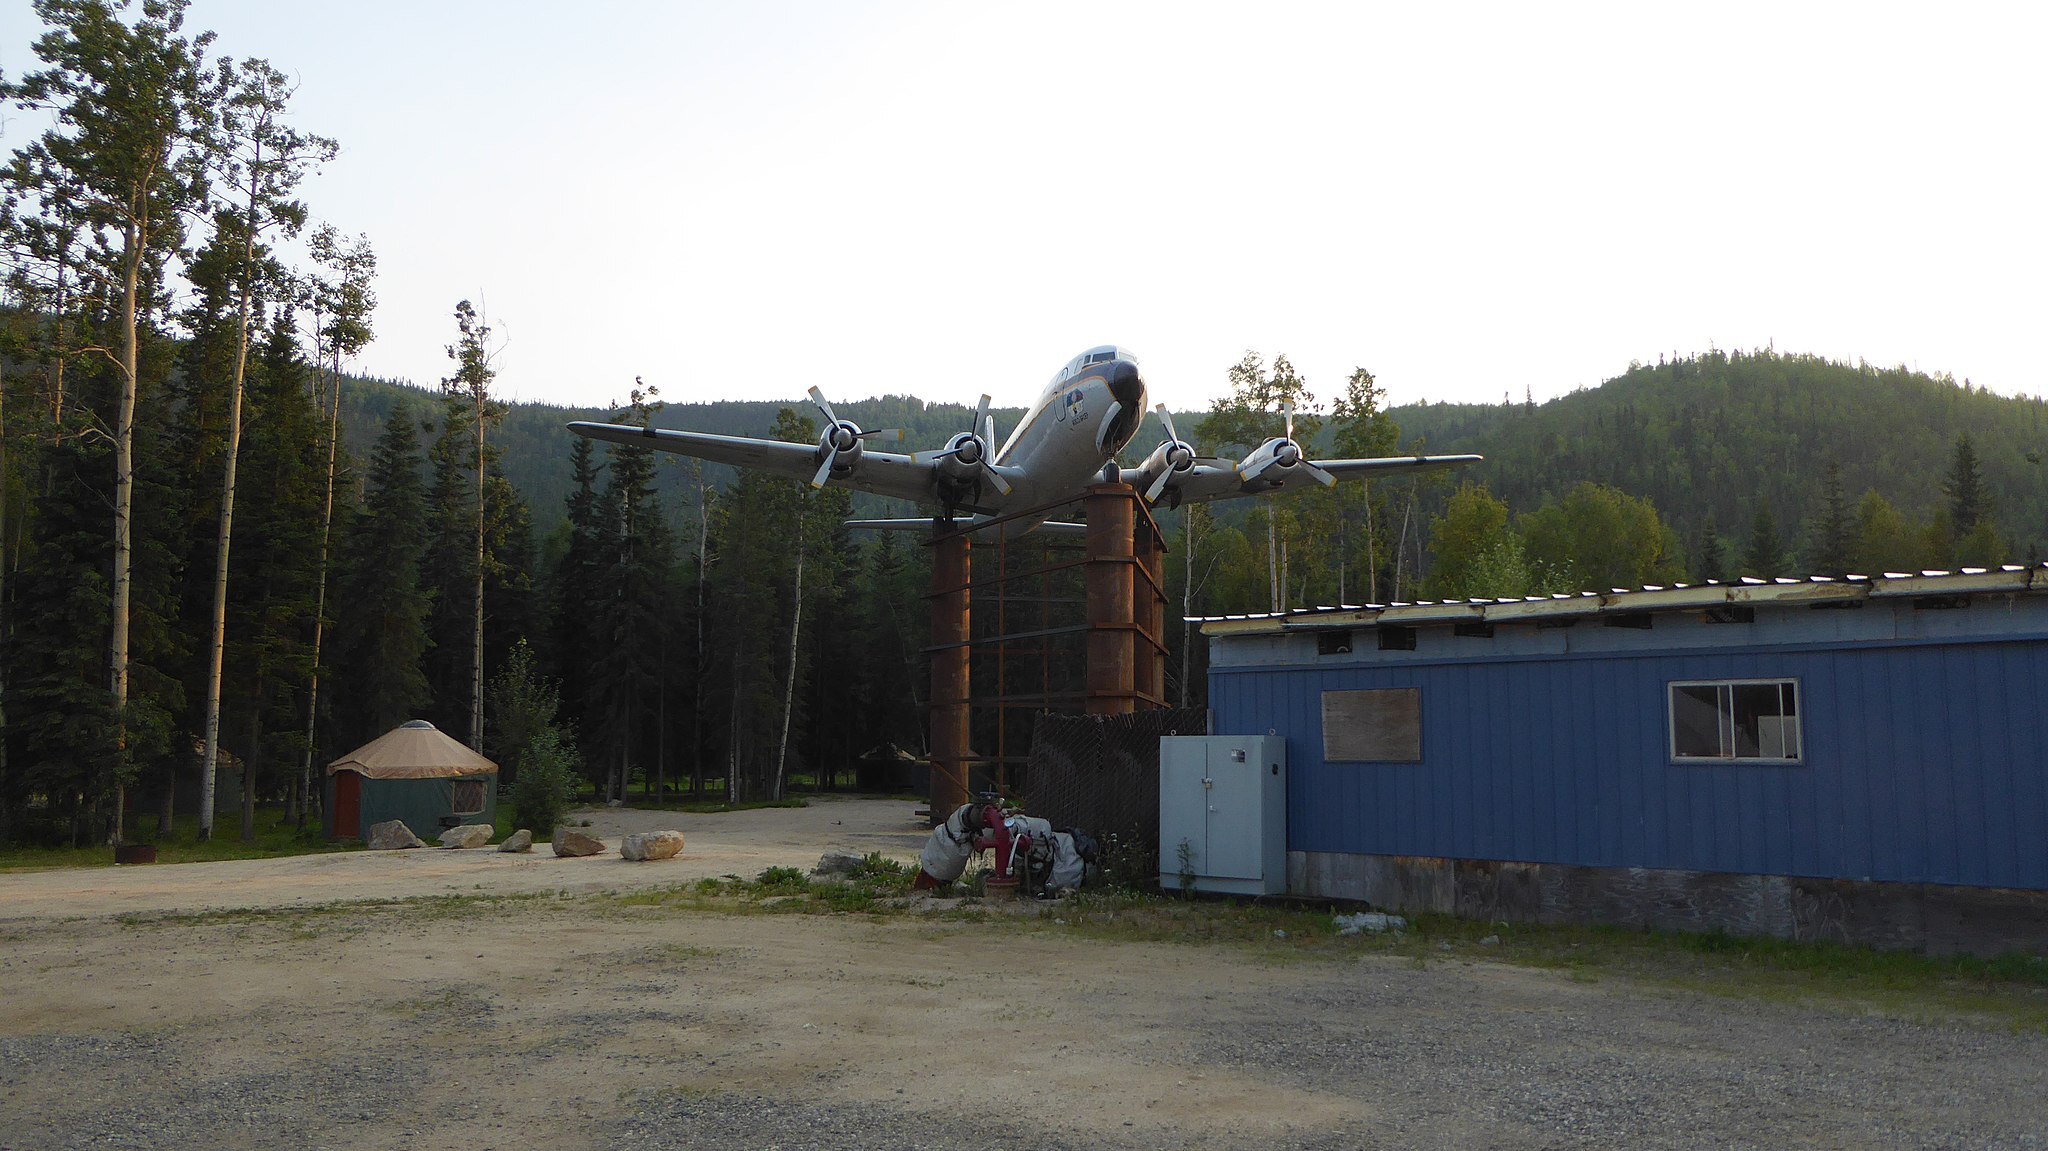 A DC6 aircraft previously owned by Everts Air Cargo on display at Chena Hot Springs, AK. Landed on a dirt airstrip and hoisted on top of 30-foot poles for display.